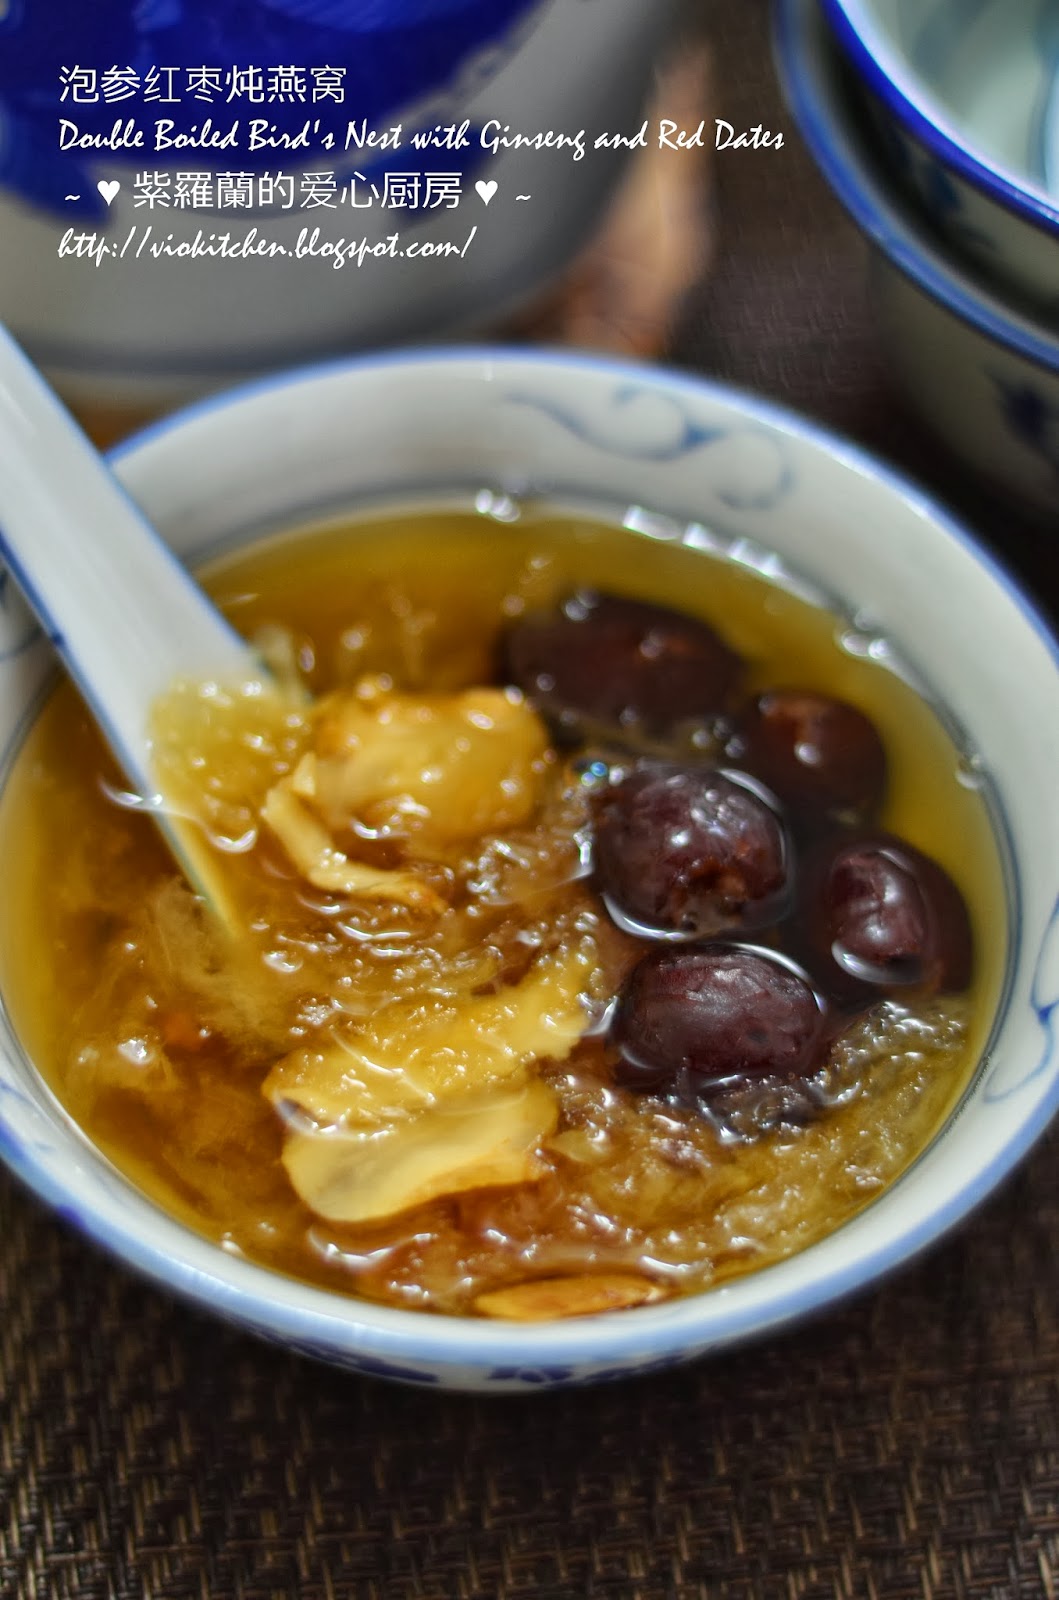 Violet's Kitchen ~♥紫羅蘭的爱心厨房♥~ : 泡参红枣炖燕窝 Double Boiled Bird's Nest with ...